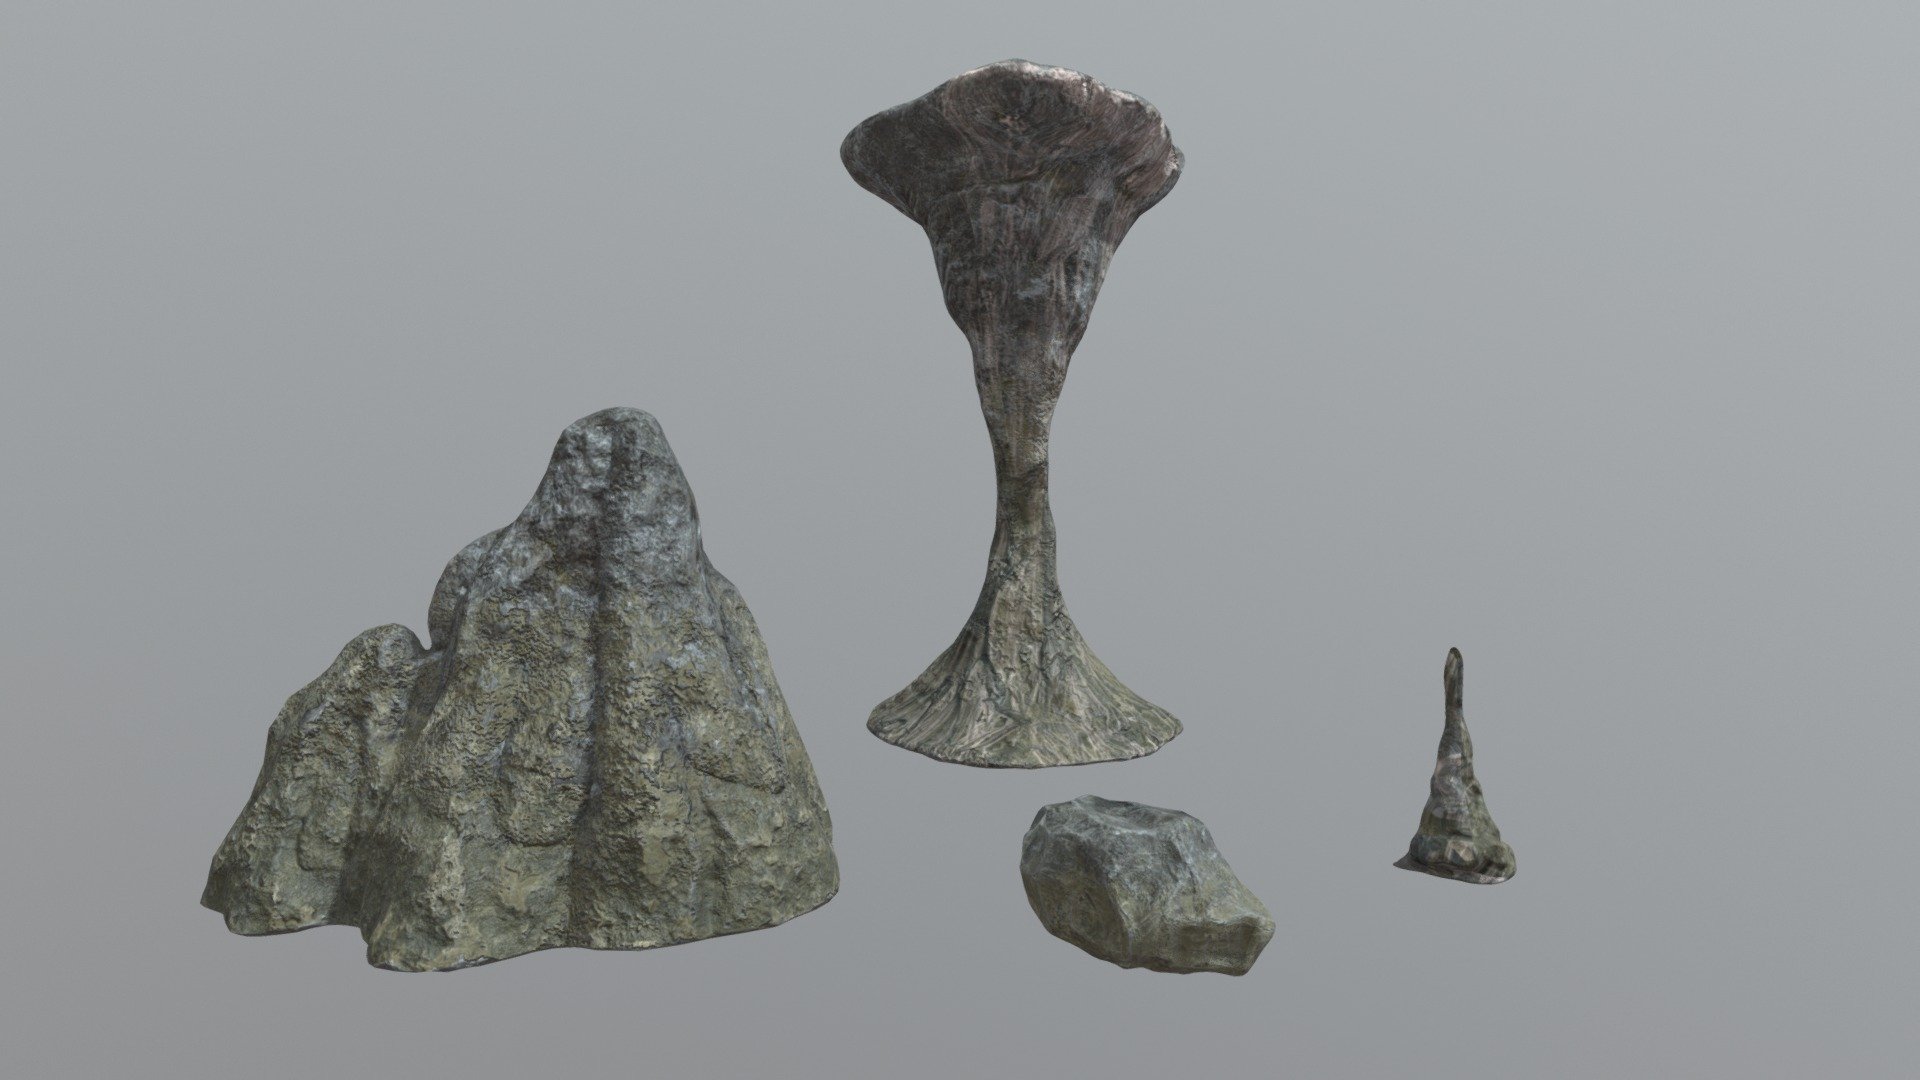 Rock Assets made for the Ophir Cave Project

Project Breakdown (Artstation) https://www.artstation.com/artwork/wVWww

You Can Check the Video Here
https://www.youtube.com/watch?v=loRwXftQej4 - Ophir Cave Project - Rock Assets - 3D model by Juan Milanese (@juanmilanese) 3d model